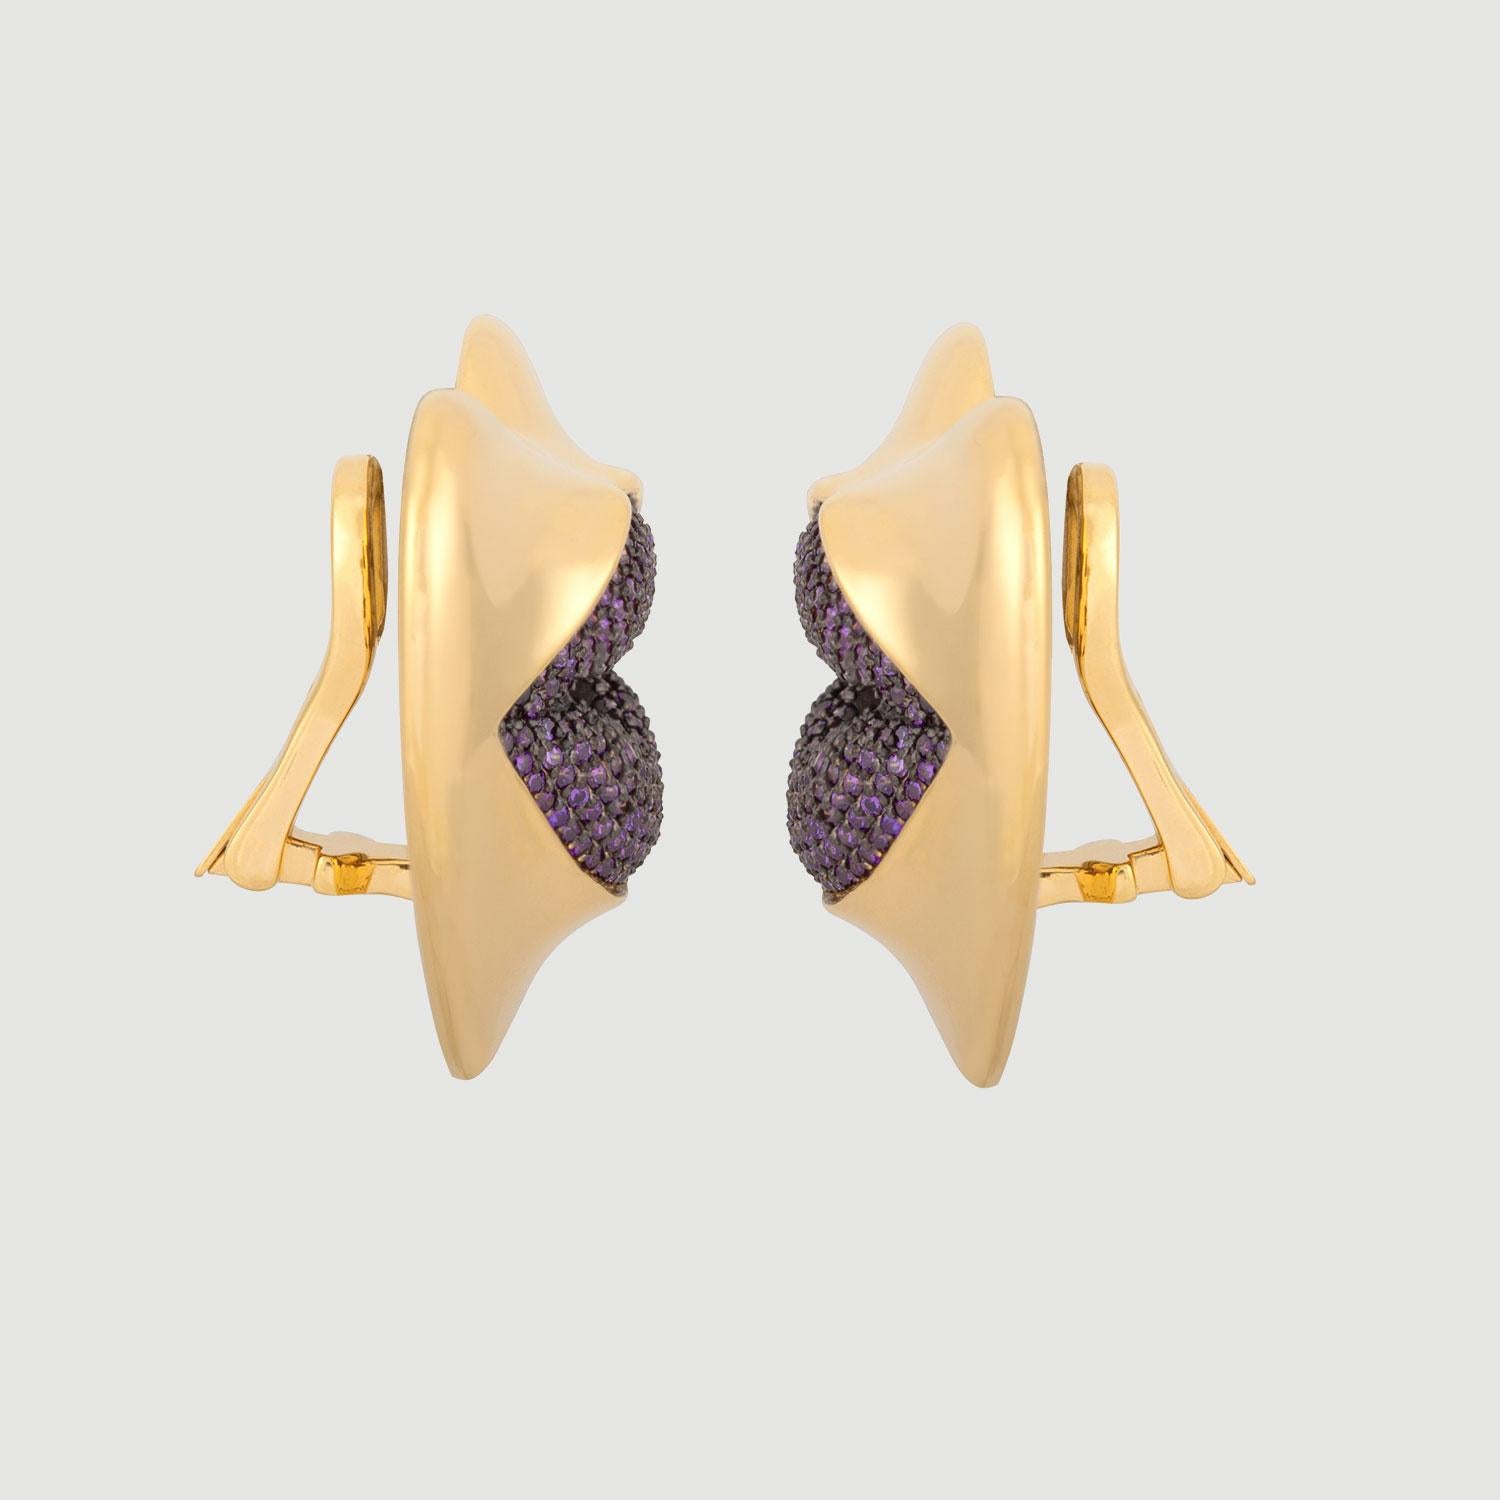 Love starts with the heart and lasts on the lips. These might be the sexiest earrings ever! Our sexy gold statement heart earrings with amethyst kisses. Shine your love on!

Composition: Sterling Silver, 18k gold vermeil and Rhodium plated.
Color: